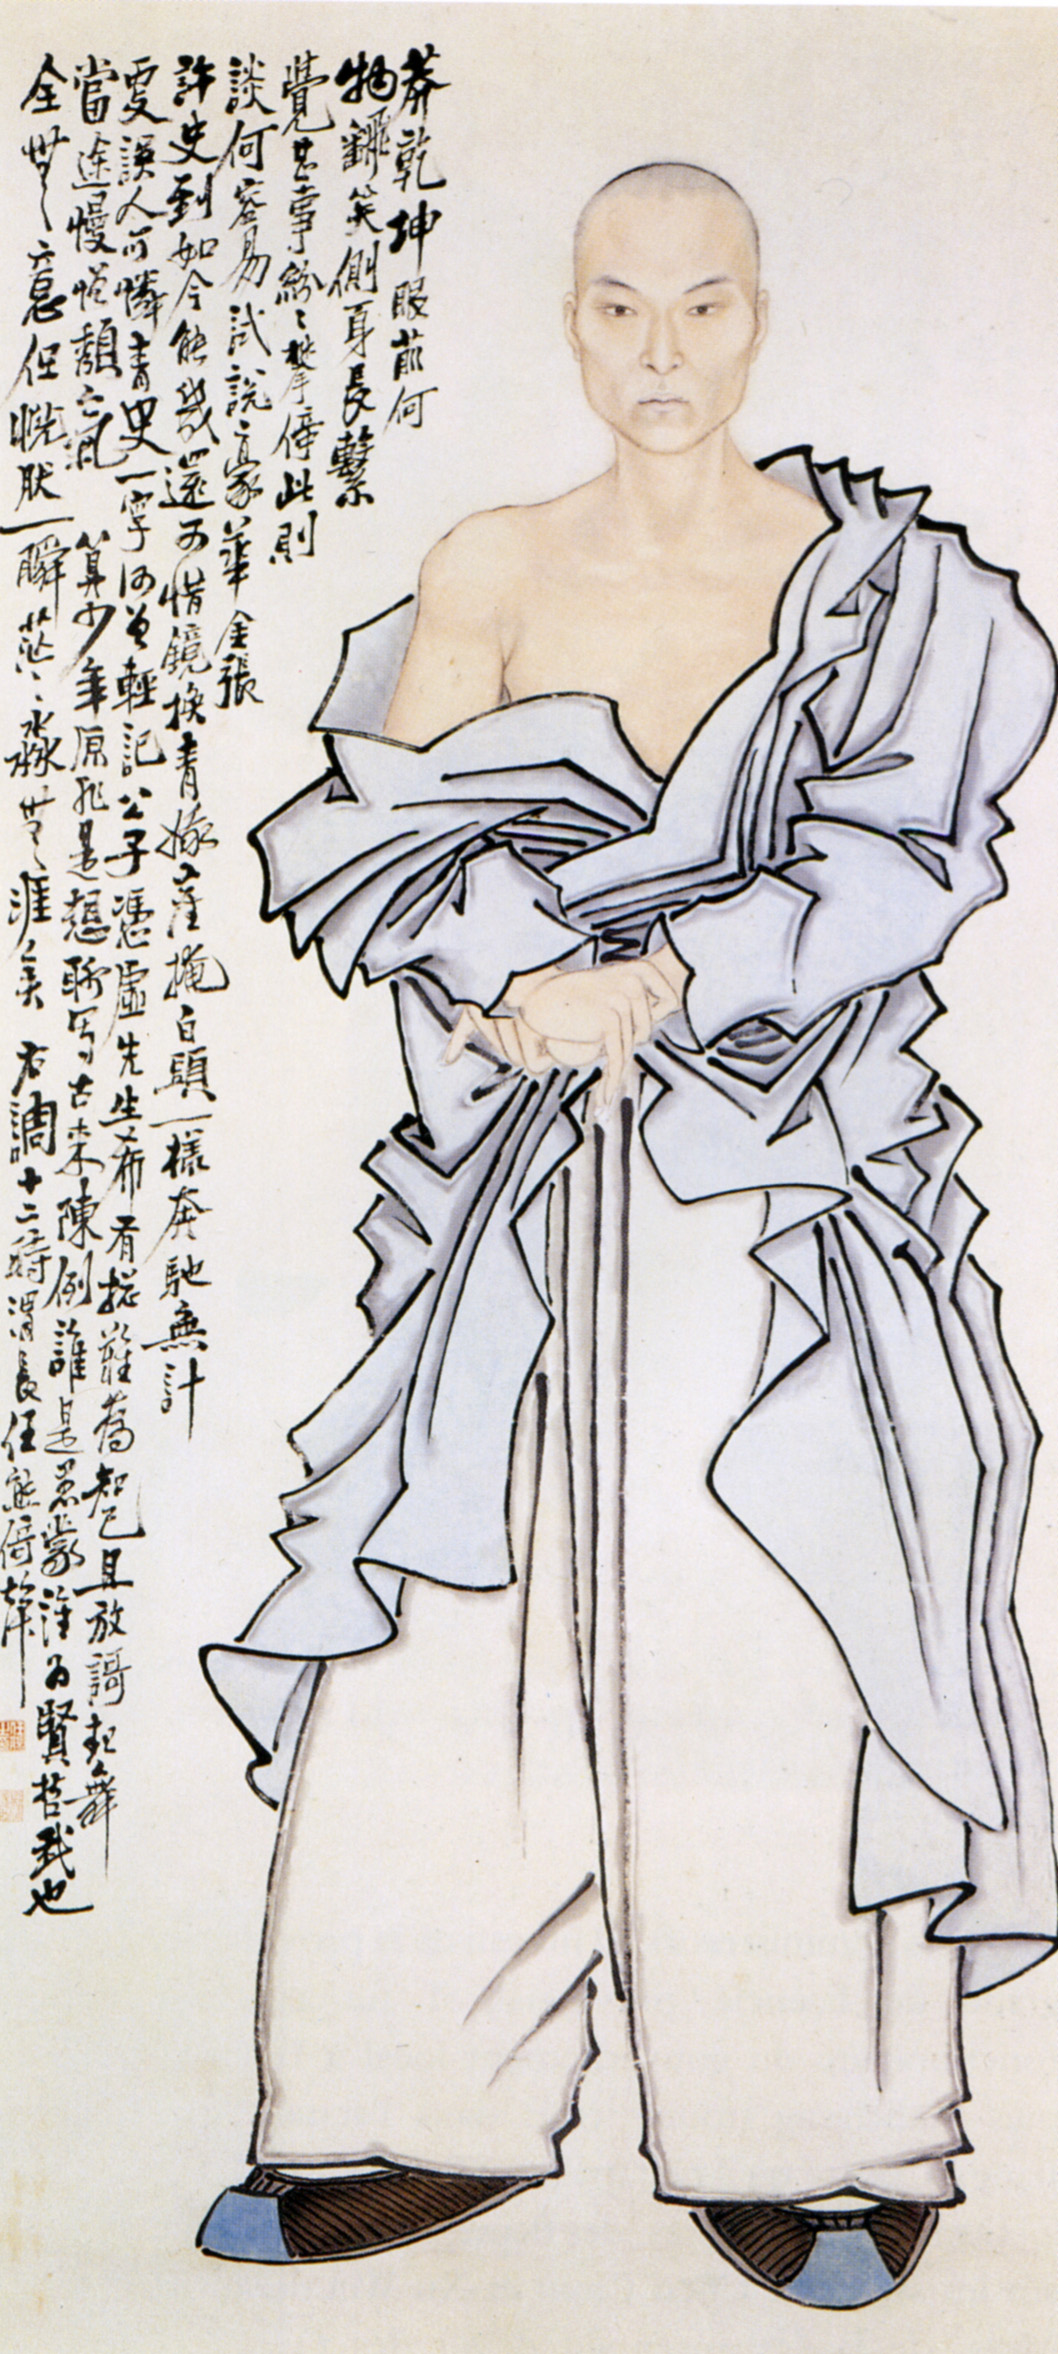 Ren Xiong, Self-Portrait (1823–57), ink and colors on paper, 177.5 x 78.8c (Palace Museum, Beijing)